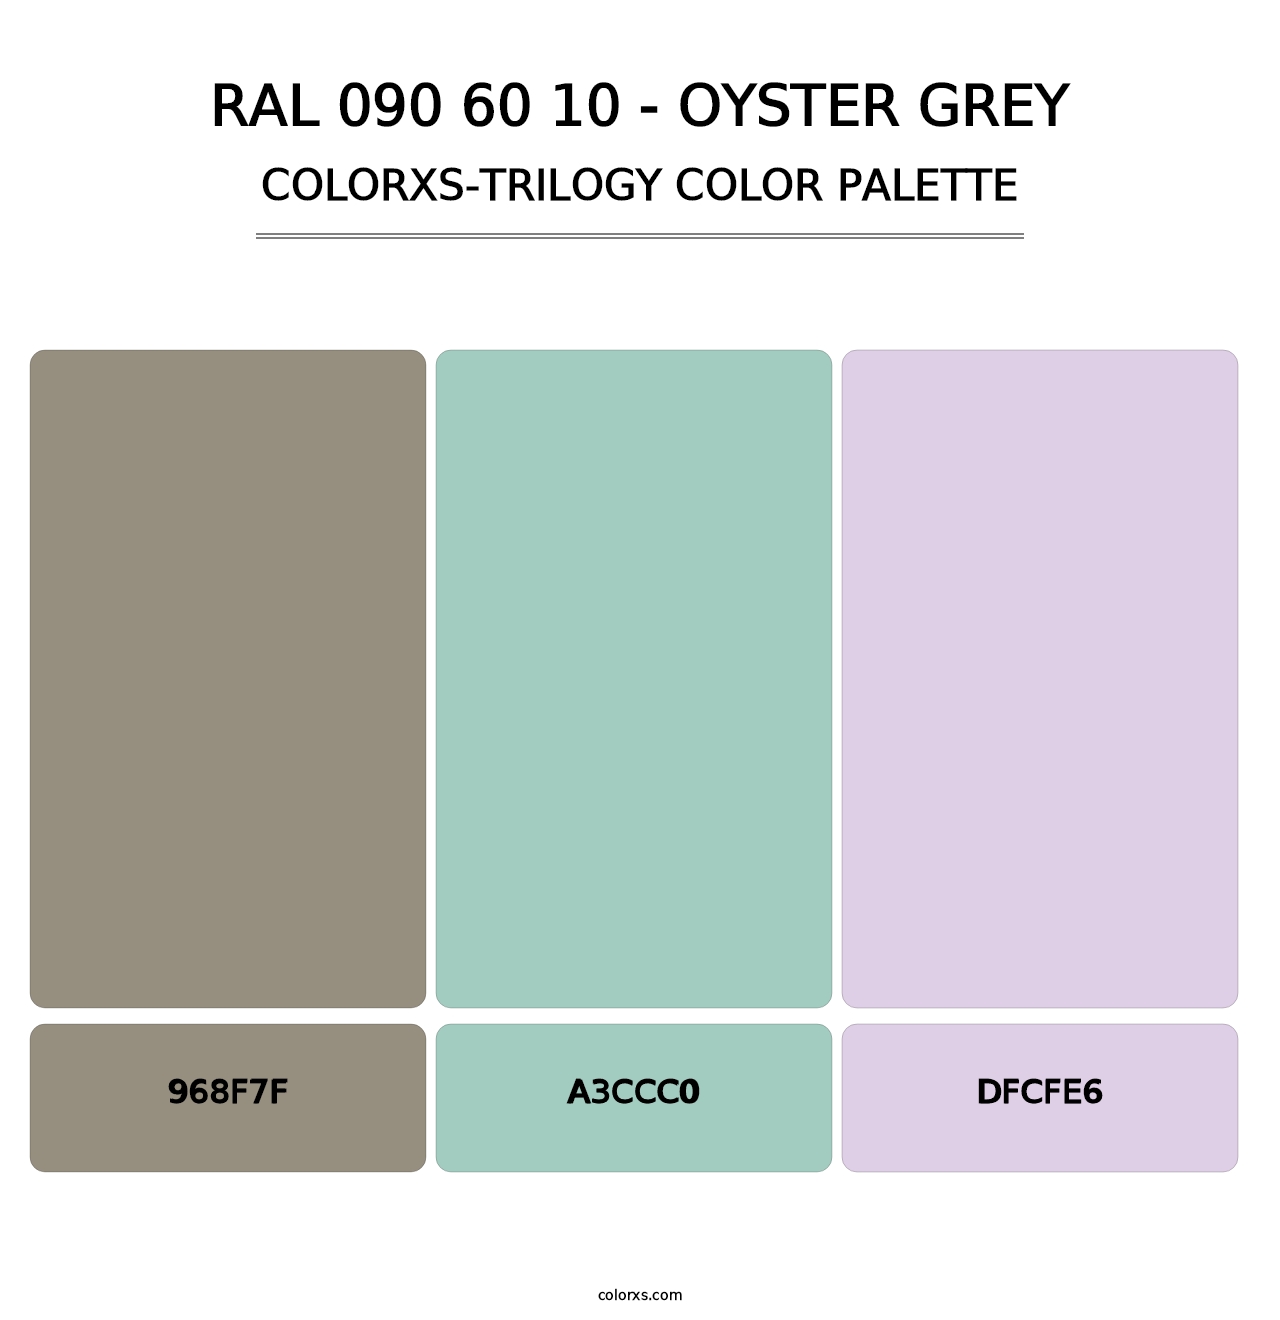 RAL 090 60 10 - Oyster Grey - Colorxs Trilogy Palette